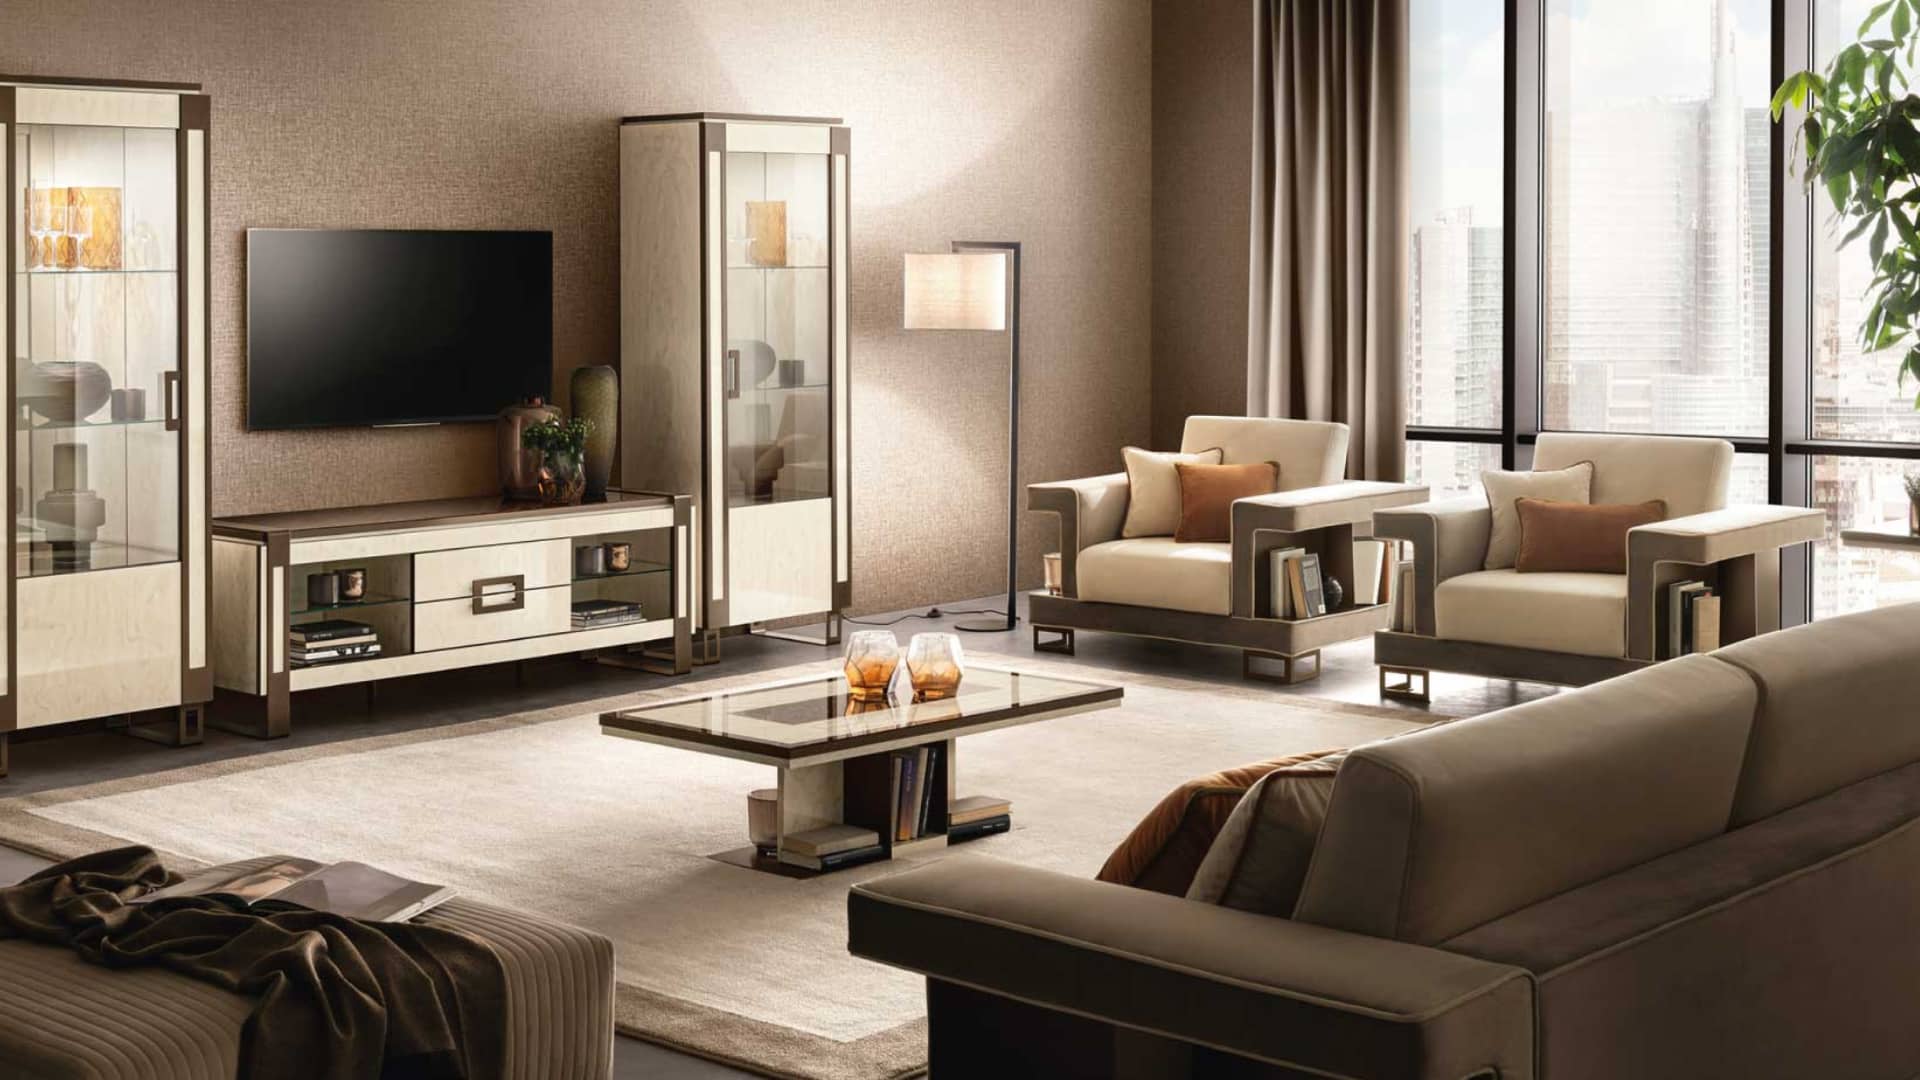 How to choose the best contemporary living room set to furnish your small apartment